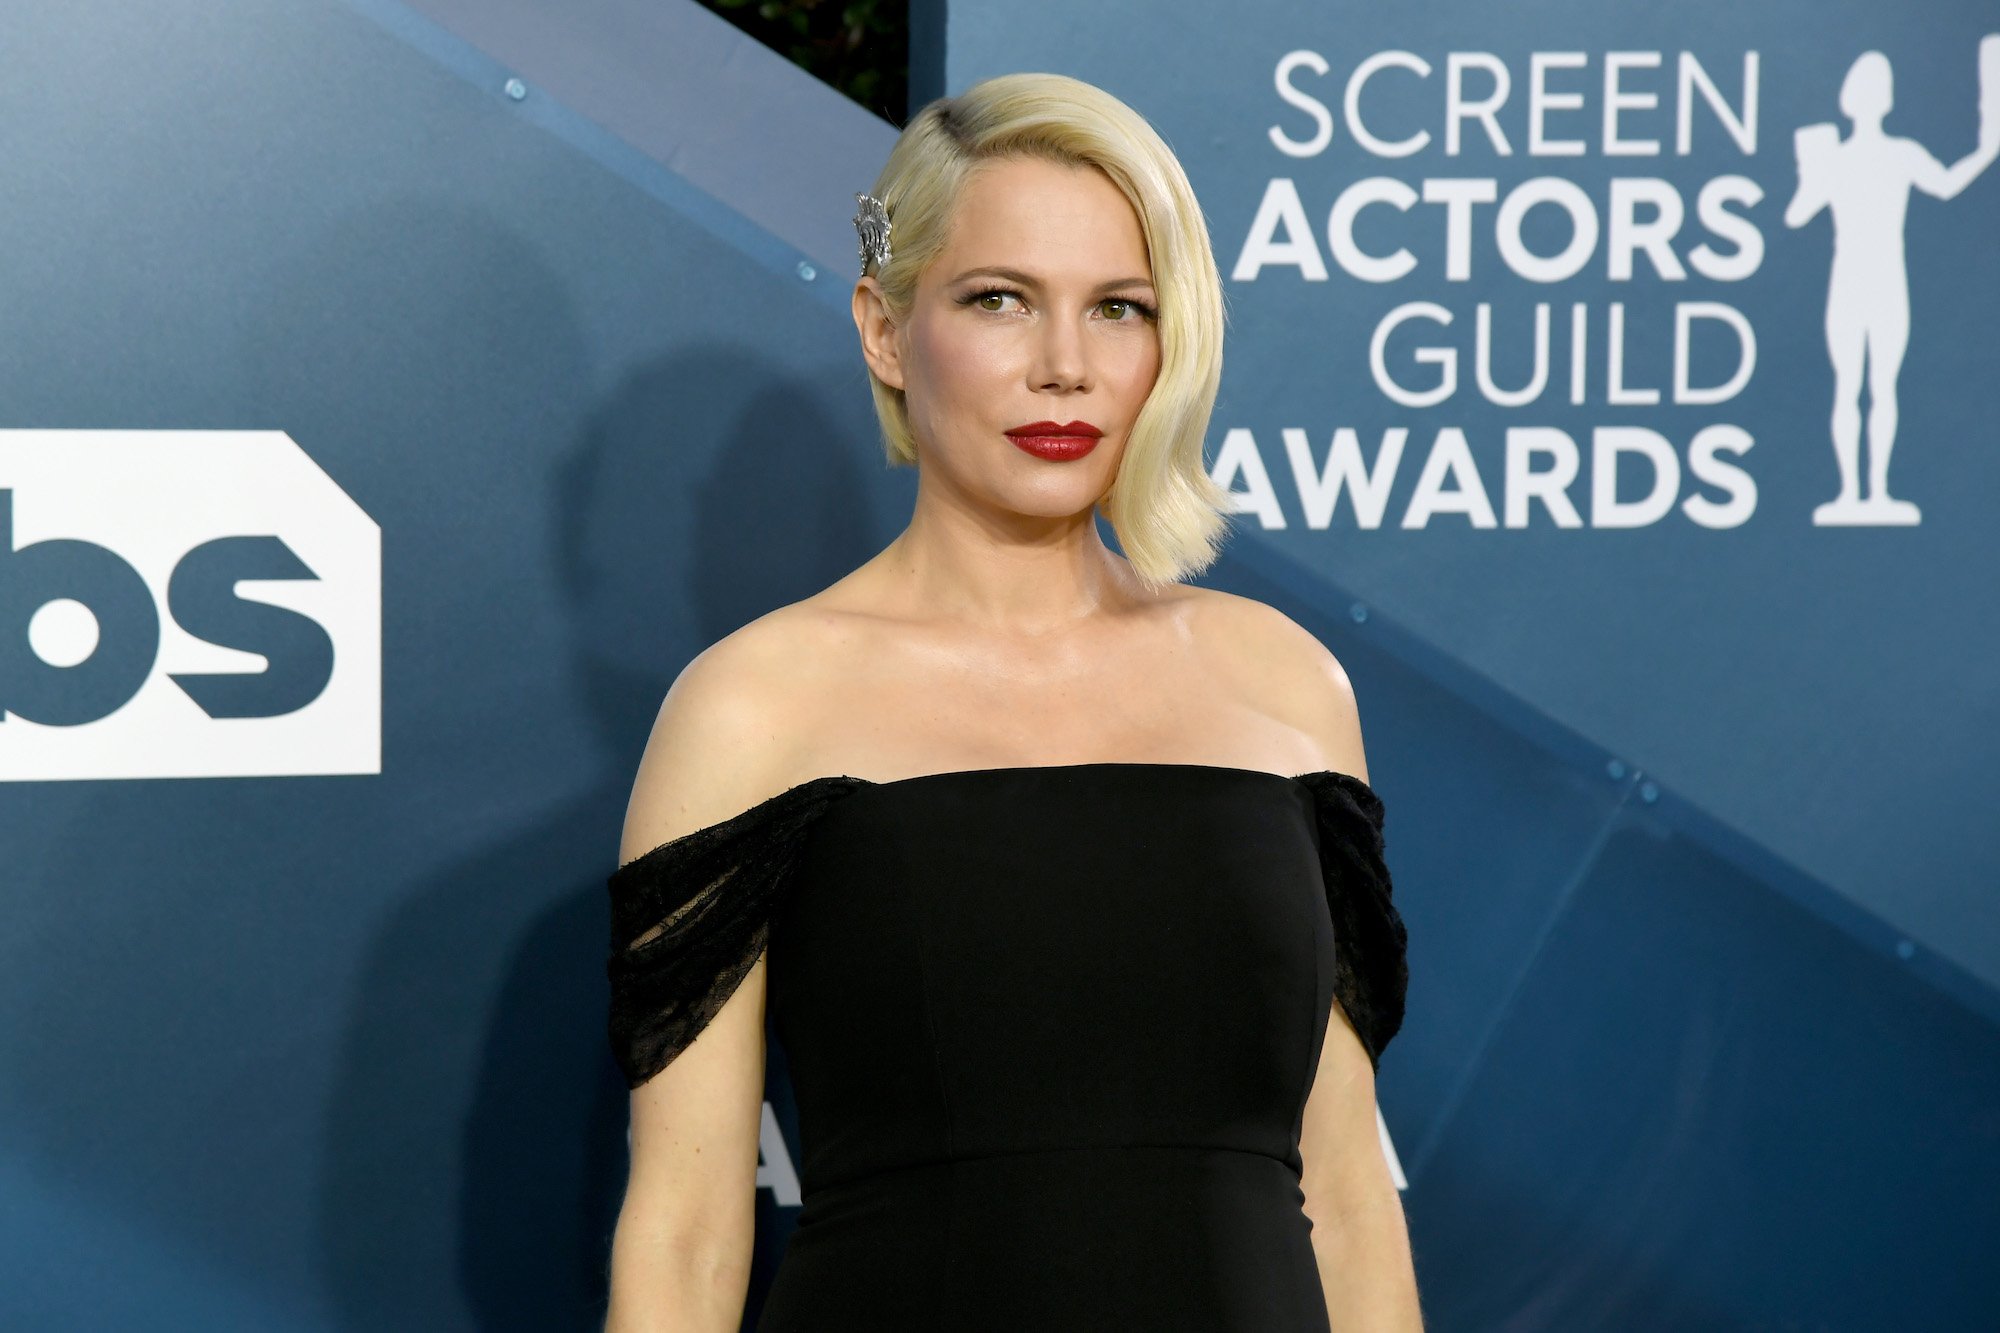 ‘Dawson’s Creek’: Michelle Williams’ Co-Star Might Be Why She’s So Accomplished